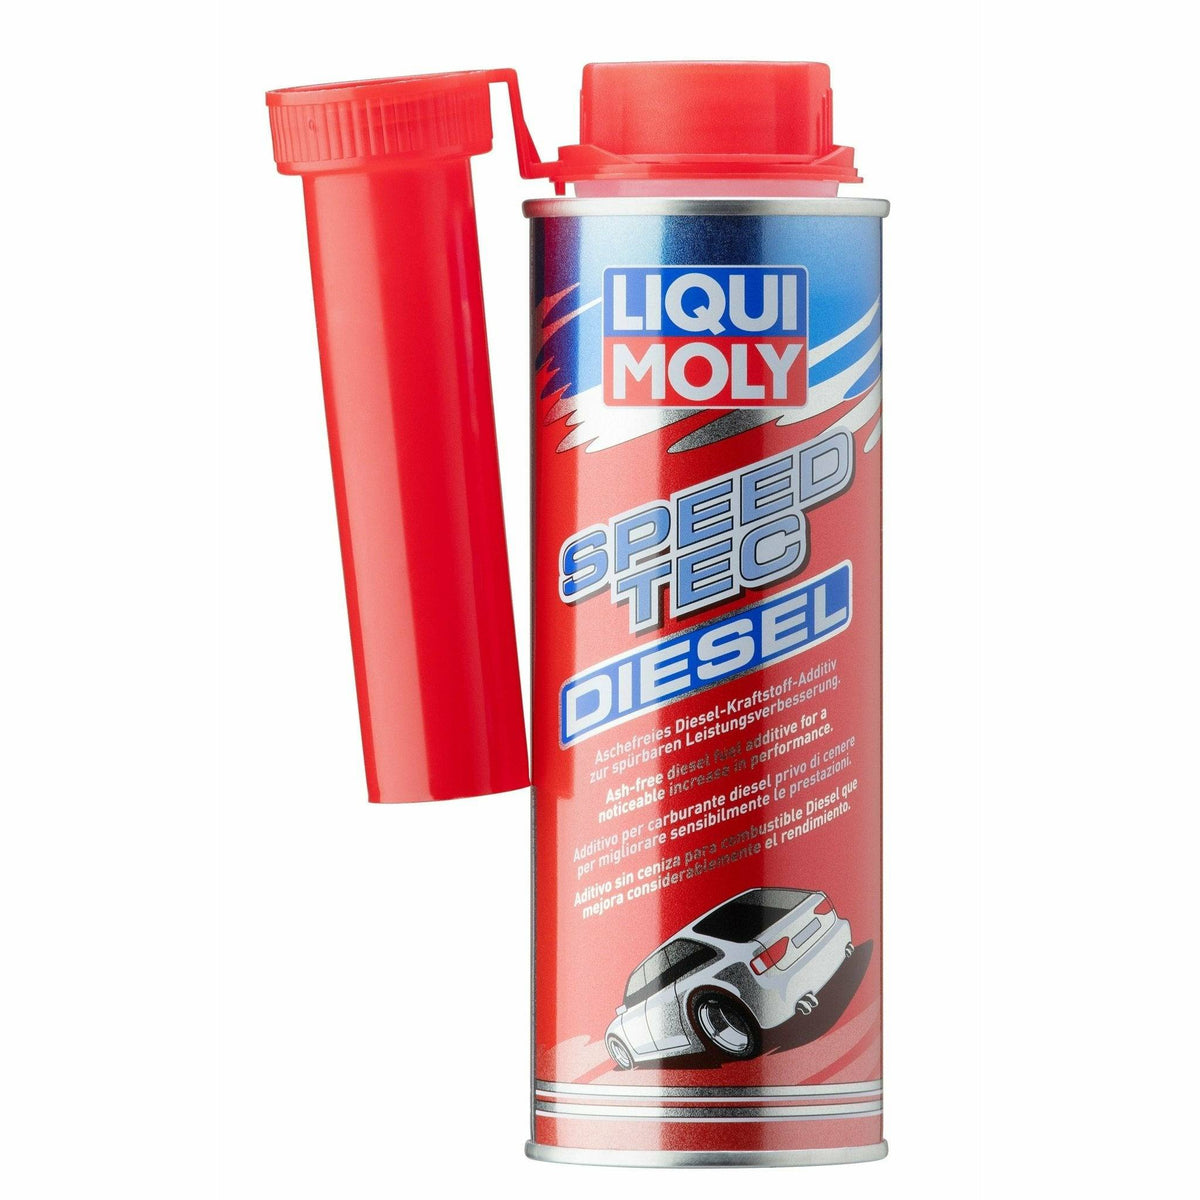 SPEED TEC DIESEL All Diesel Engines Oil Additives 250ml Liqui Moly 3722 1  UNIT – World of Lubricant